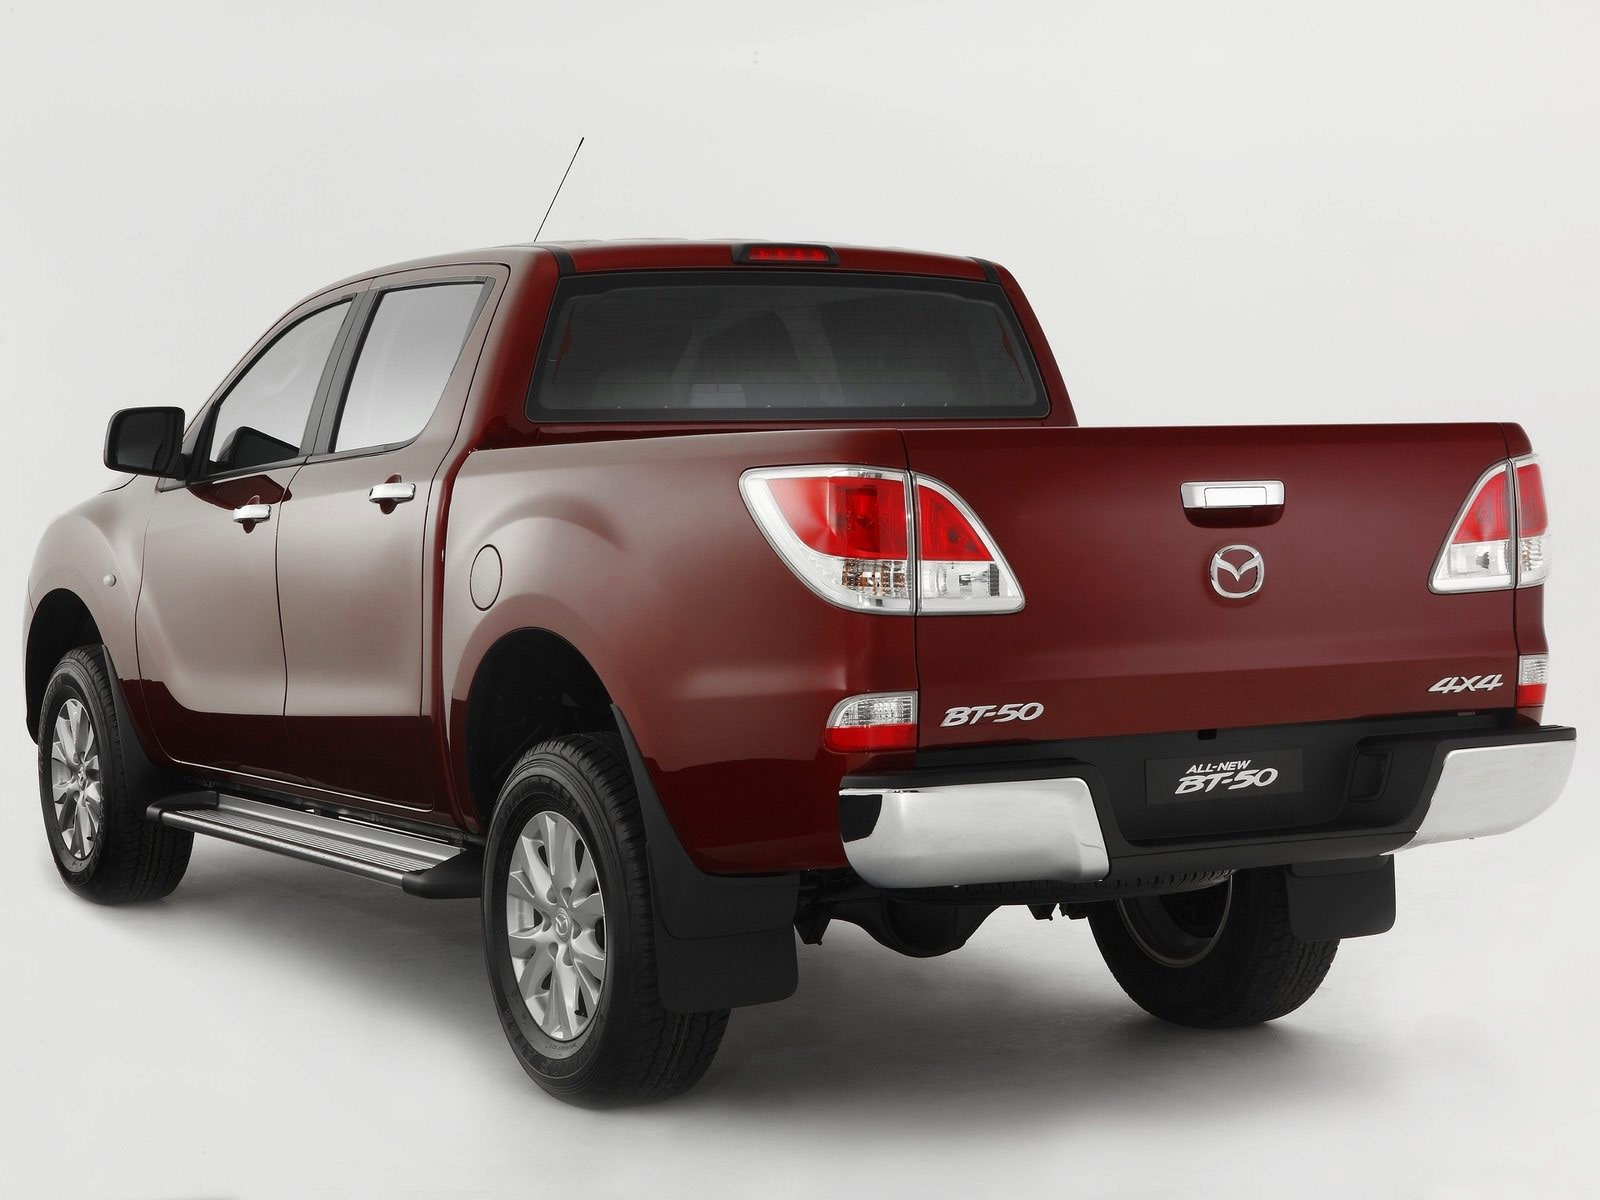 2012 MAZDA BT-50 car pictures | Accident lawyers information